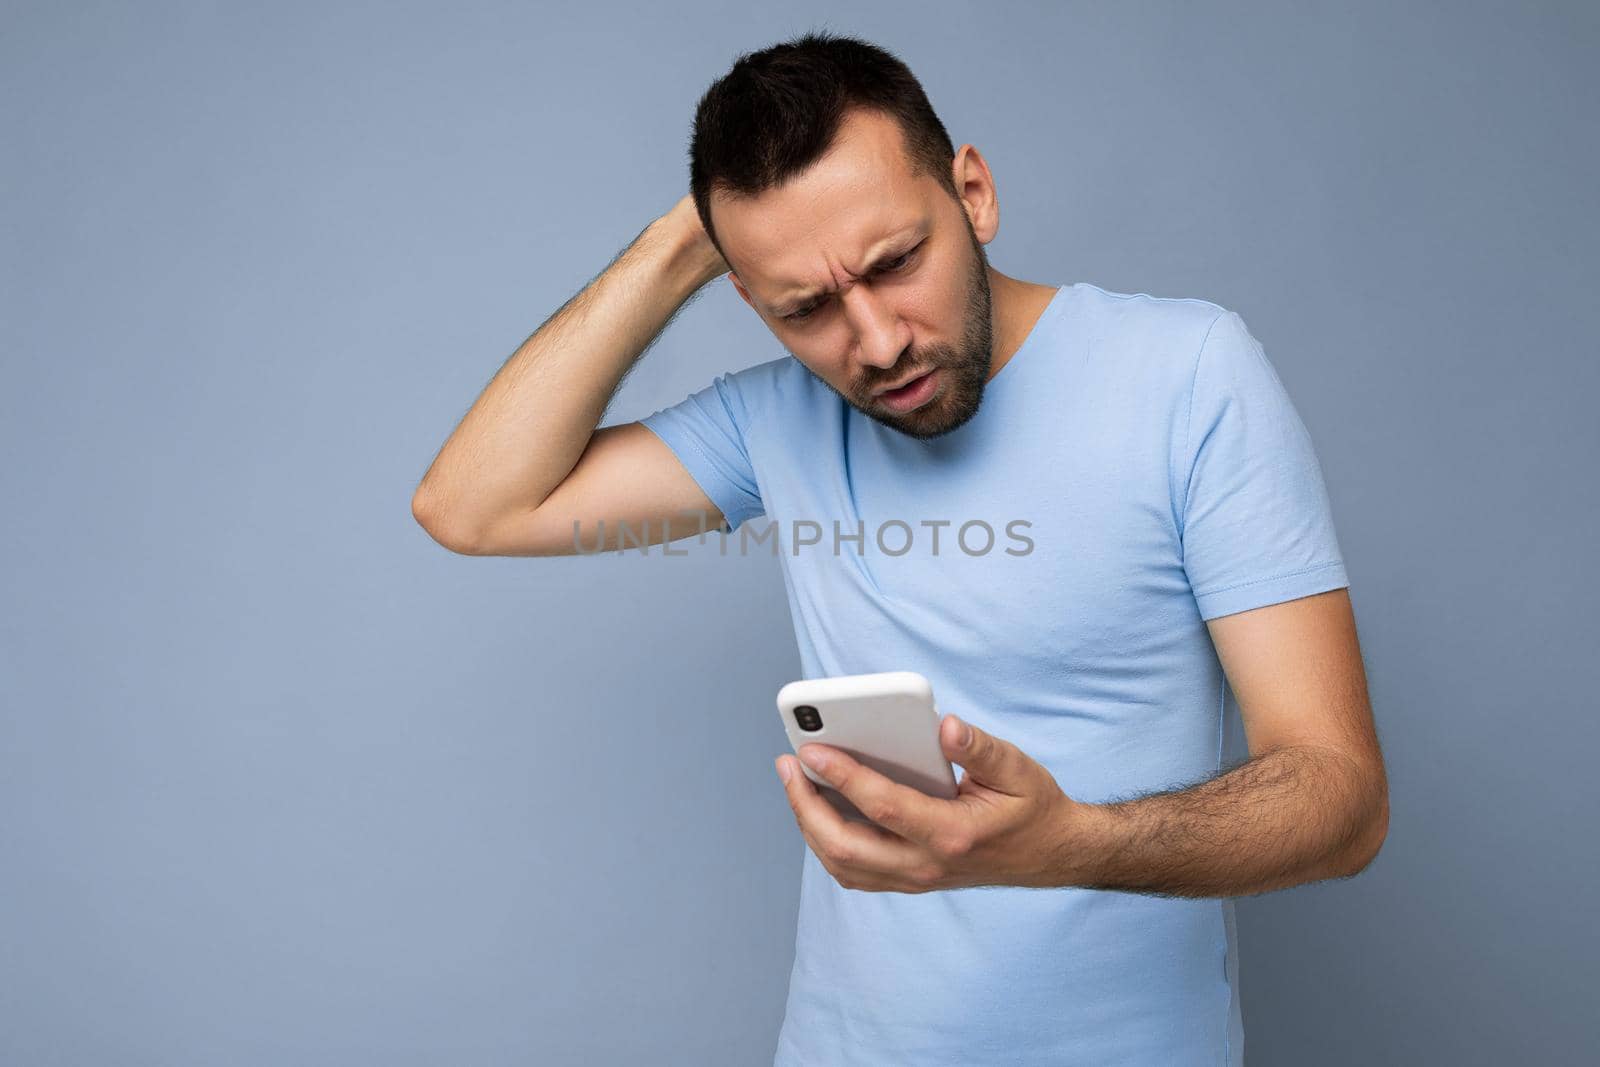 Photo shot of handsome don't understanding asking good looking young man wearing casual stylish outfit poising isolated on background with empty space holding in hand and using mobile phone messaging sms looking at smartphone display screen.